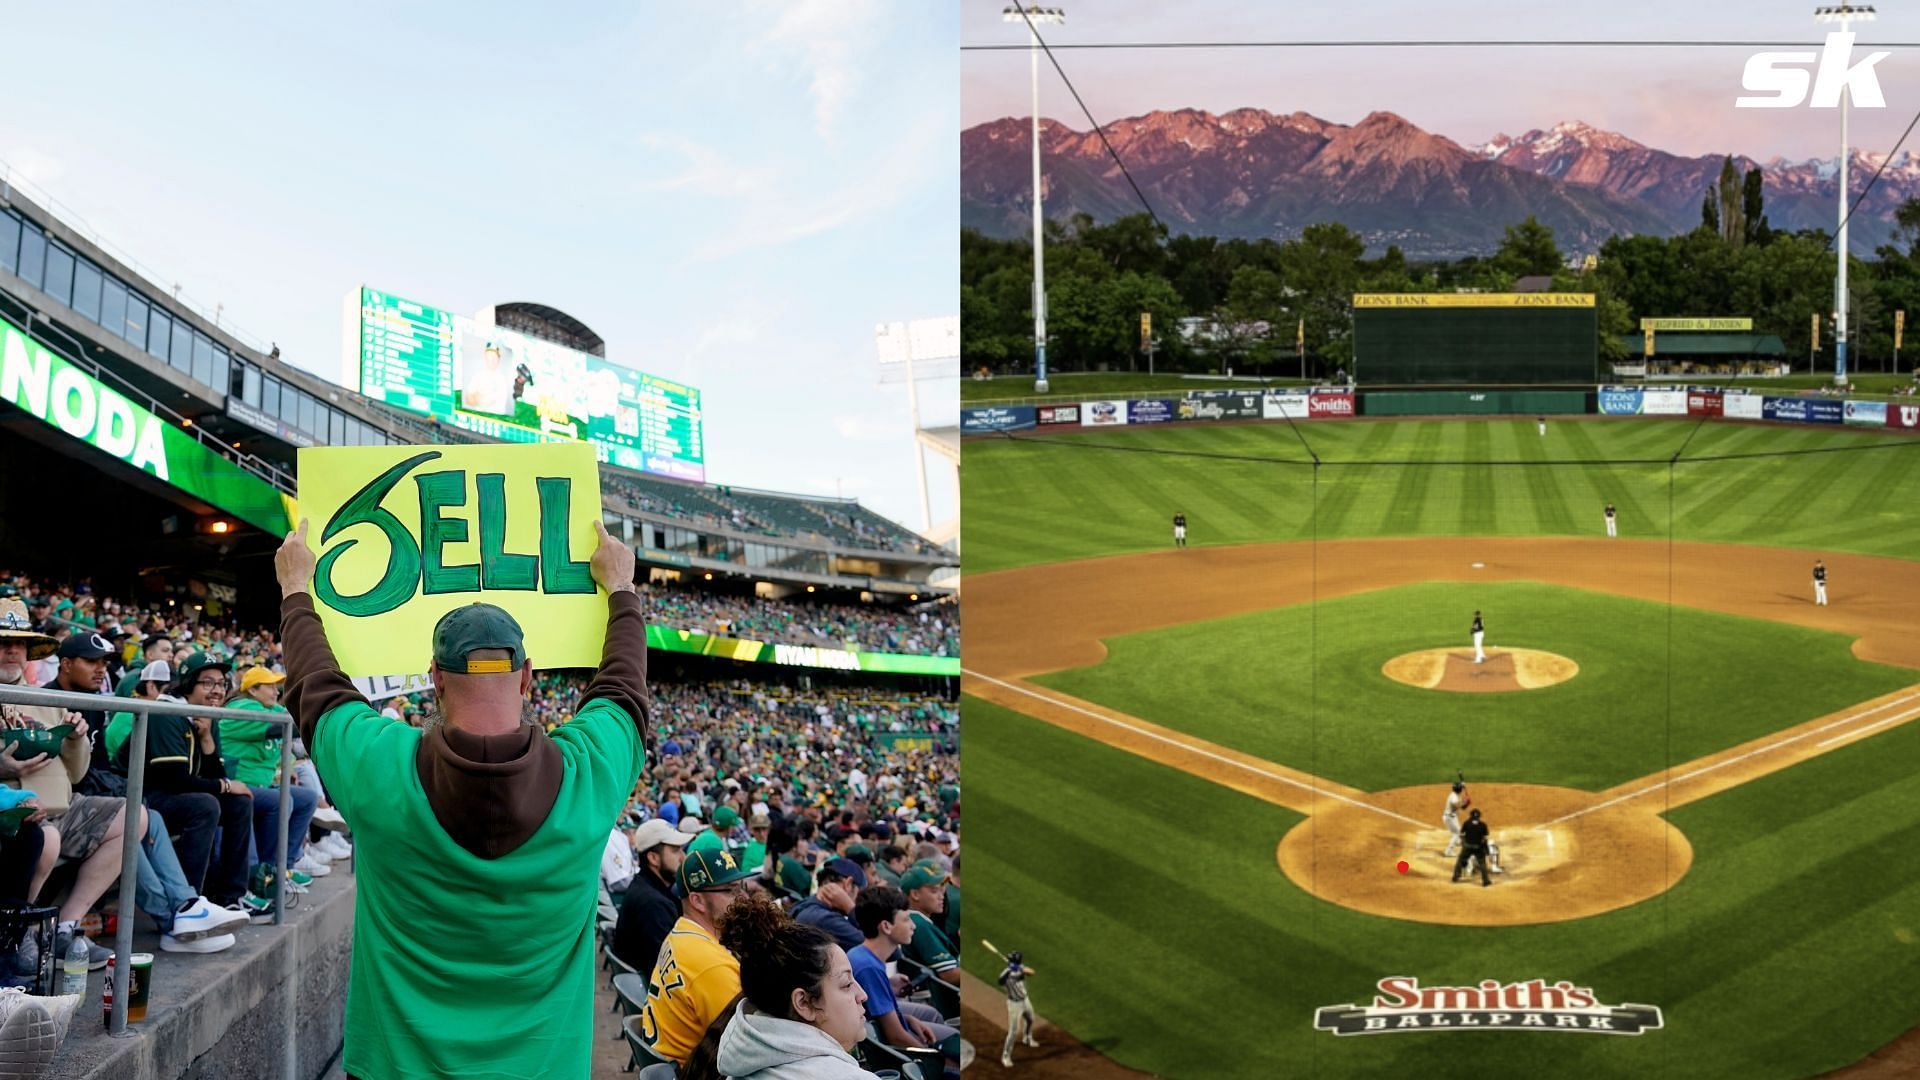 The state of Utah could soon host the Oakland A